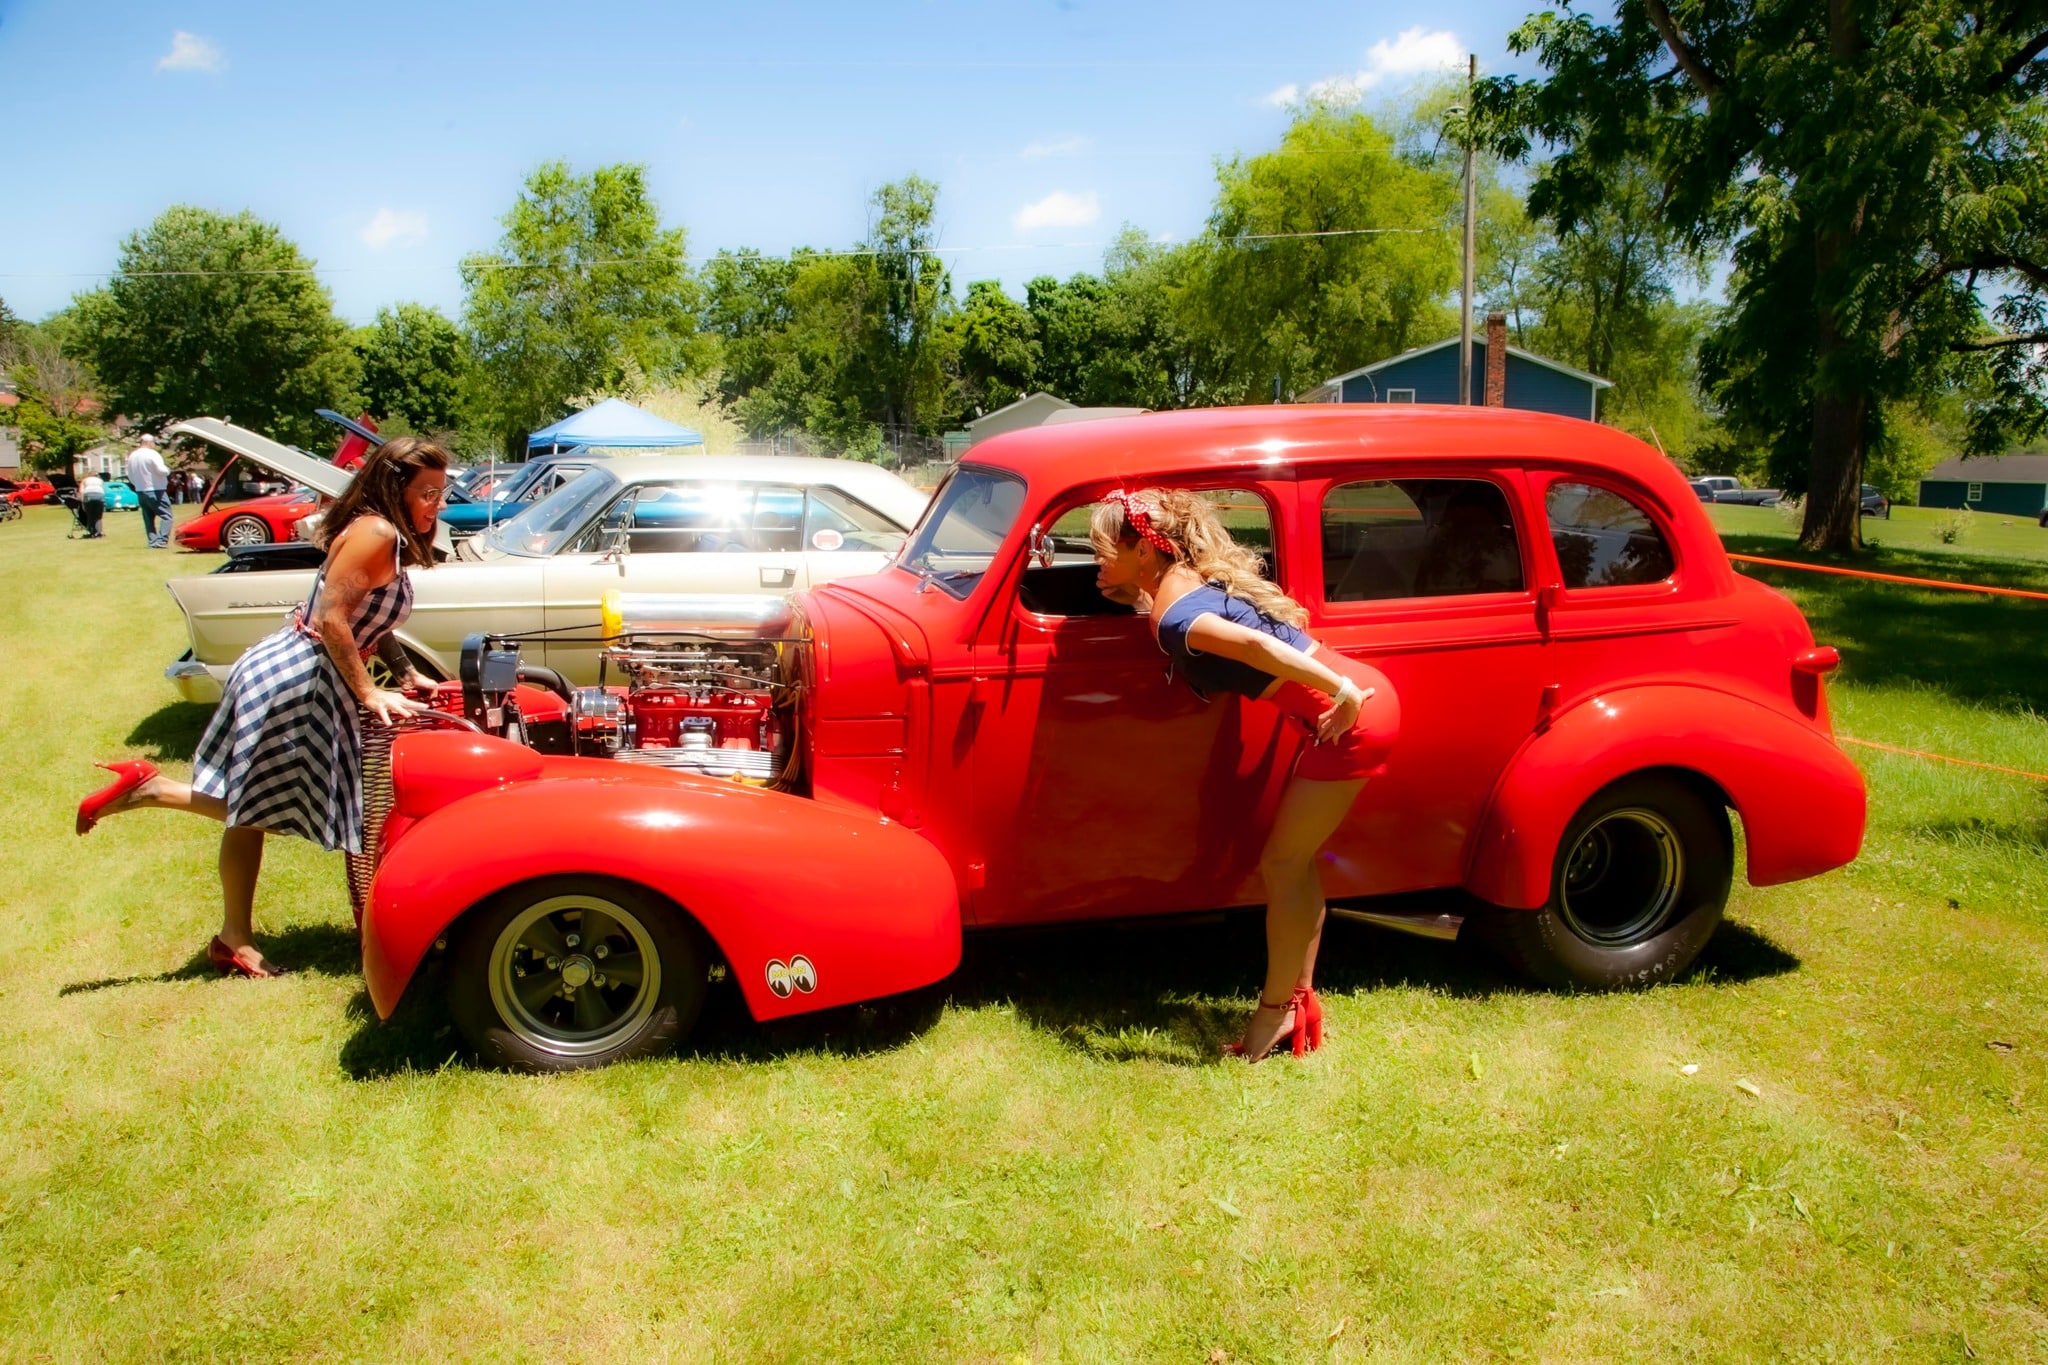 Photograph of 3 pin-up girls in front of a red car at the American Legion Cruise-In for Veterans.